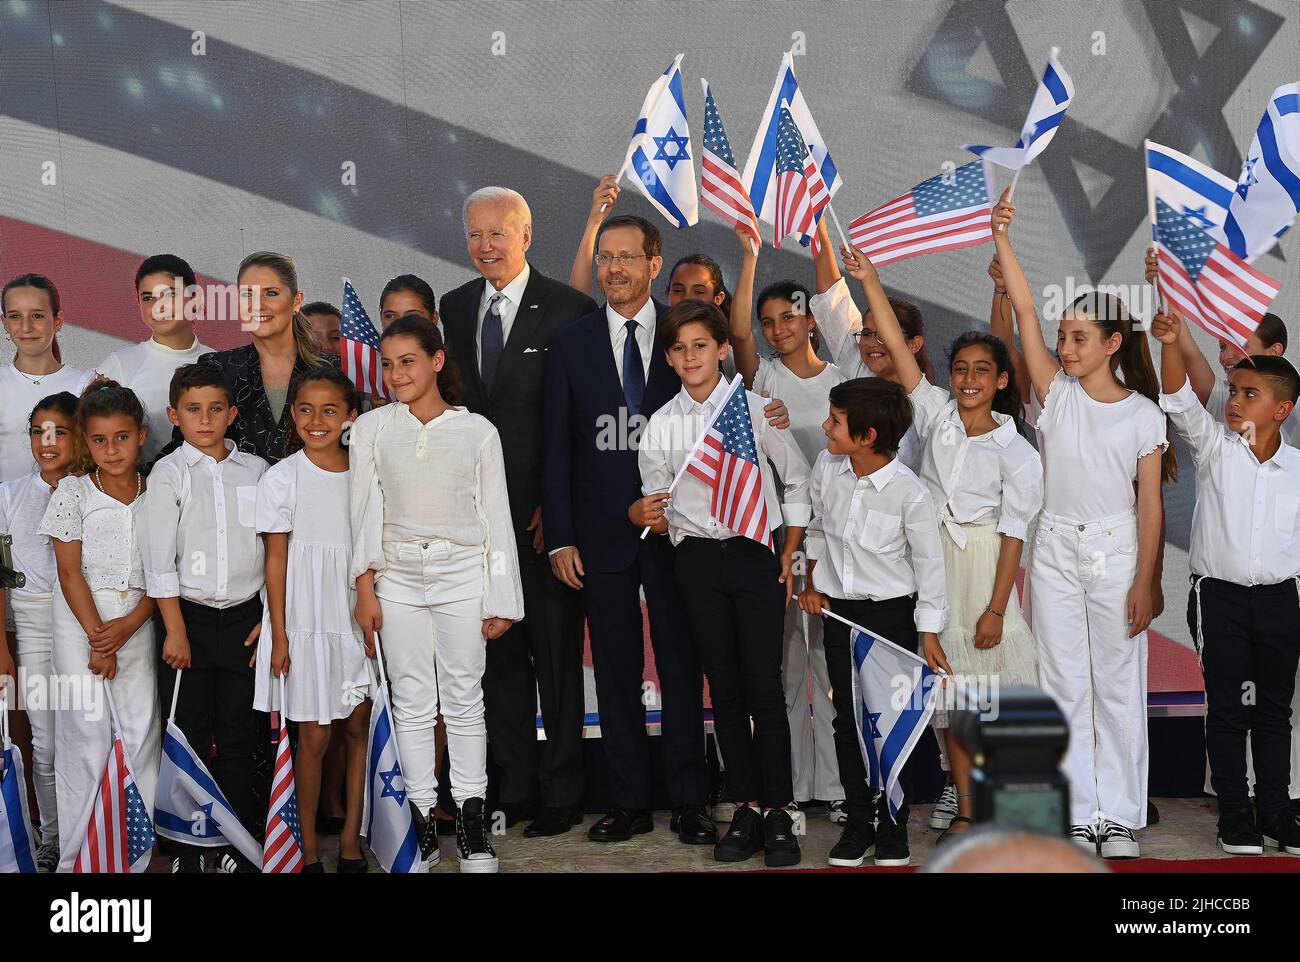 Jerusalem, Israel. 14 July, 2022. U.S President Joe Biden, and Israeli President Isaac Herzog, right, pose with a group of children during the arrival ceremony to the Presidential residence, July 14, 2022 in Jerusalem, Israel. Stock Photo